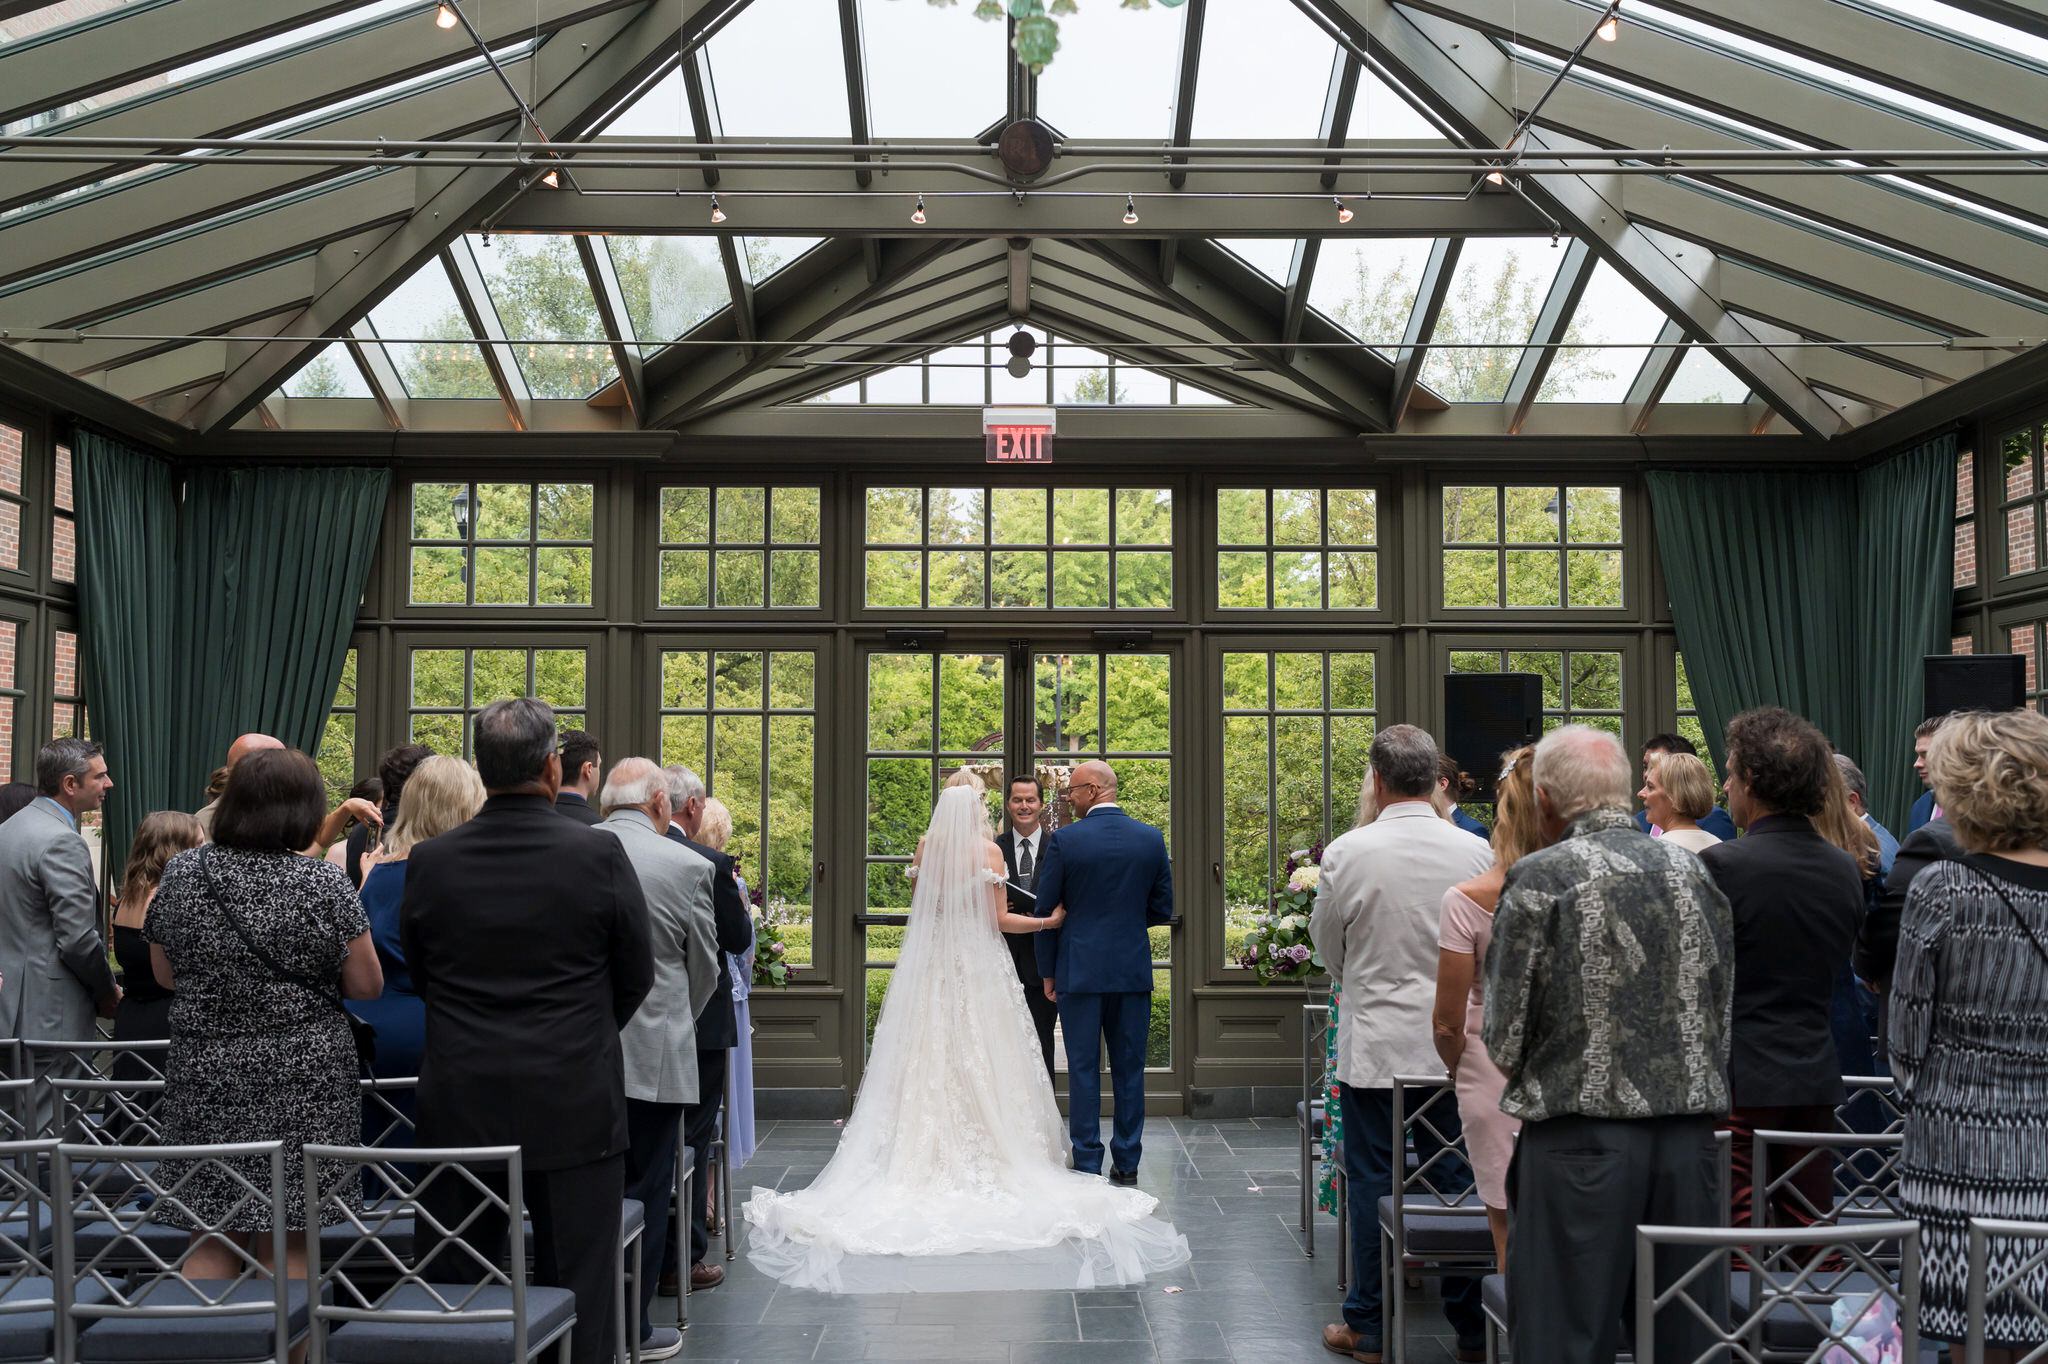 A Royal Park wedding in the Conservatory. 